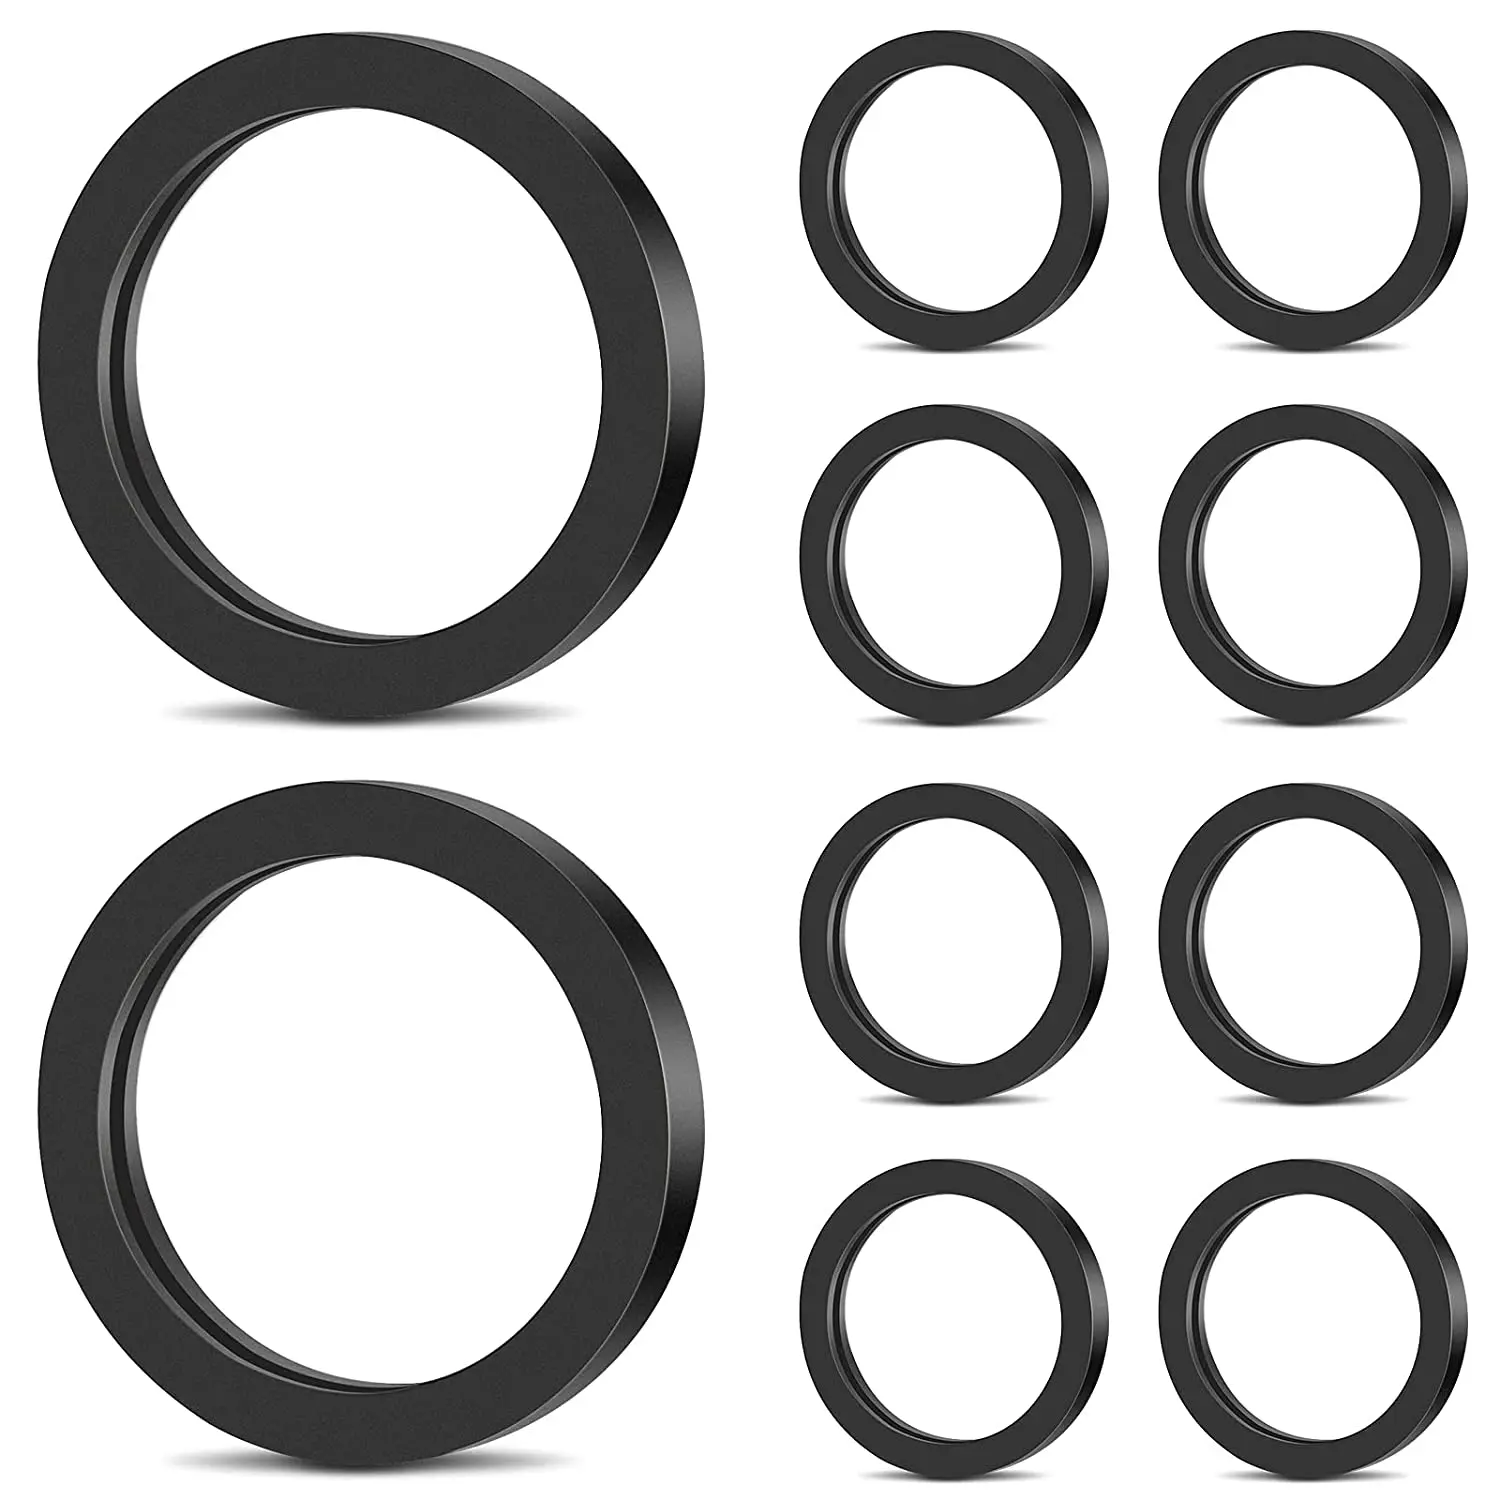 10 PCS Replacement Gas Gaskets Gas Can Spout Gaskets Fuel Washer Seals Fuel Can Spout Seals Compatible with Most Gas Can Spout